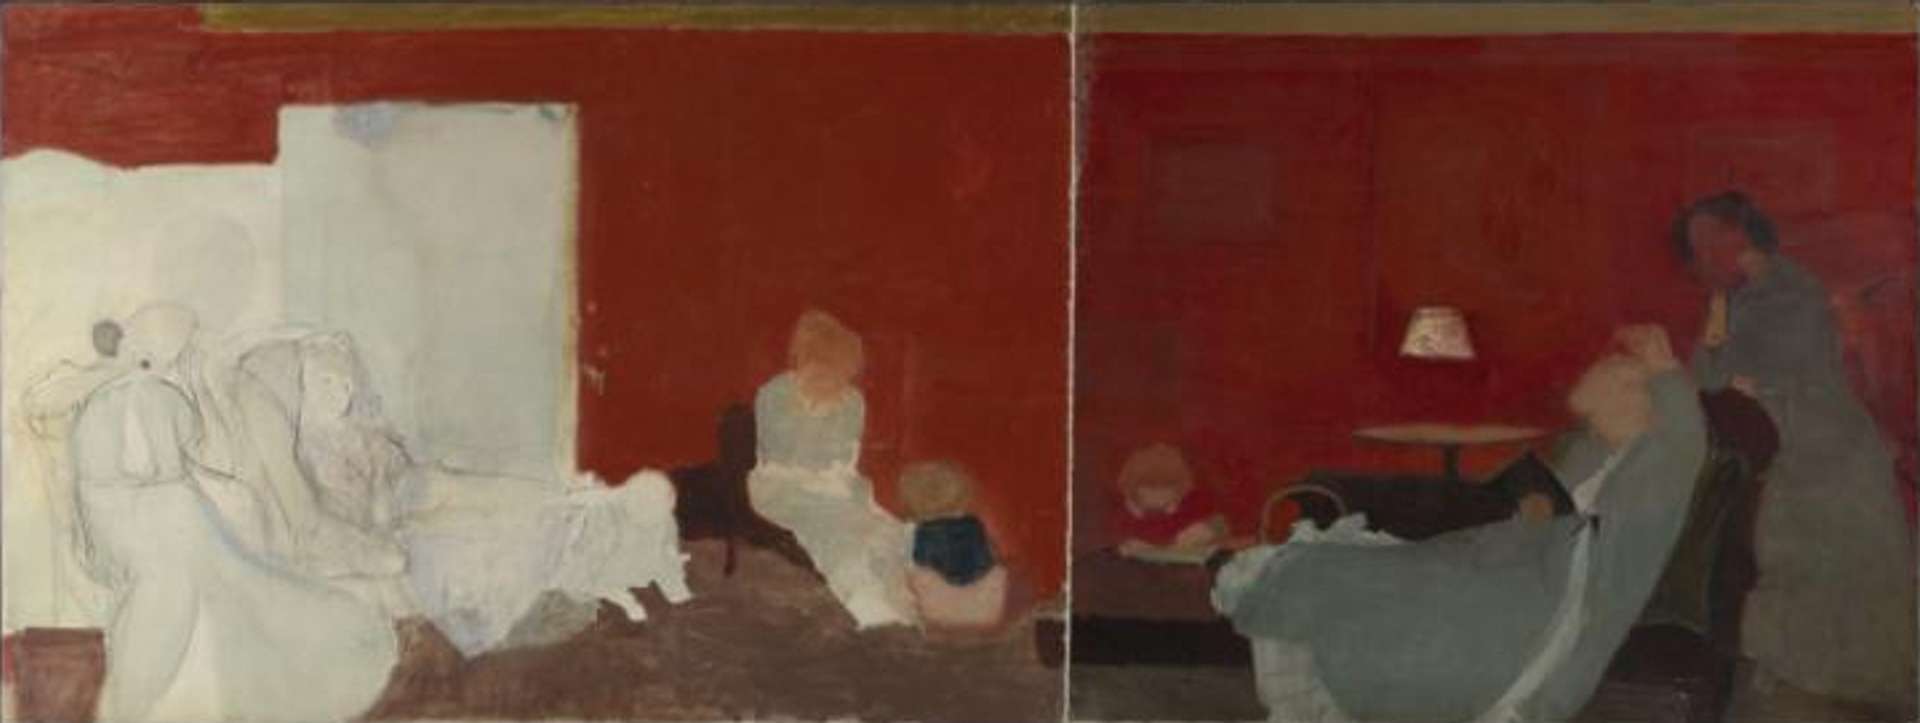 A painting titled "Interior with Reclining Women" by Victor Pasmore. The painting depicts a sparsely furnished room with two women reclining on a couch, partially obscured by furniture and shadows.